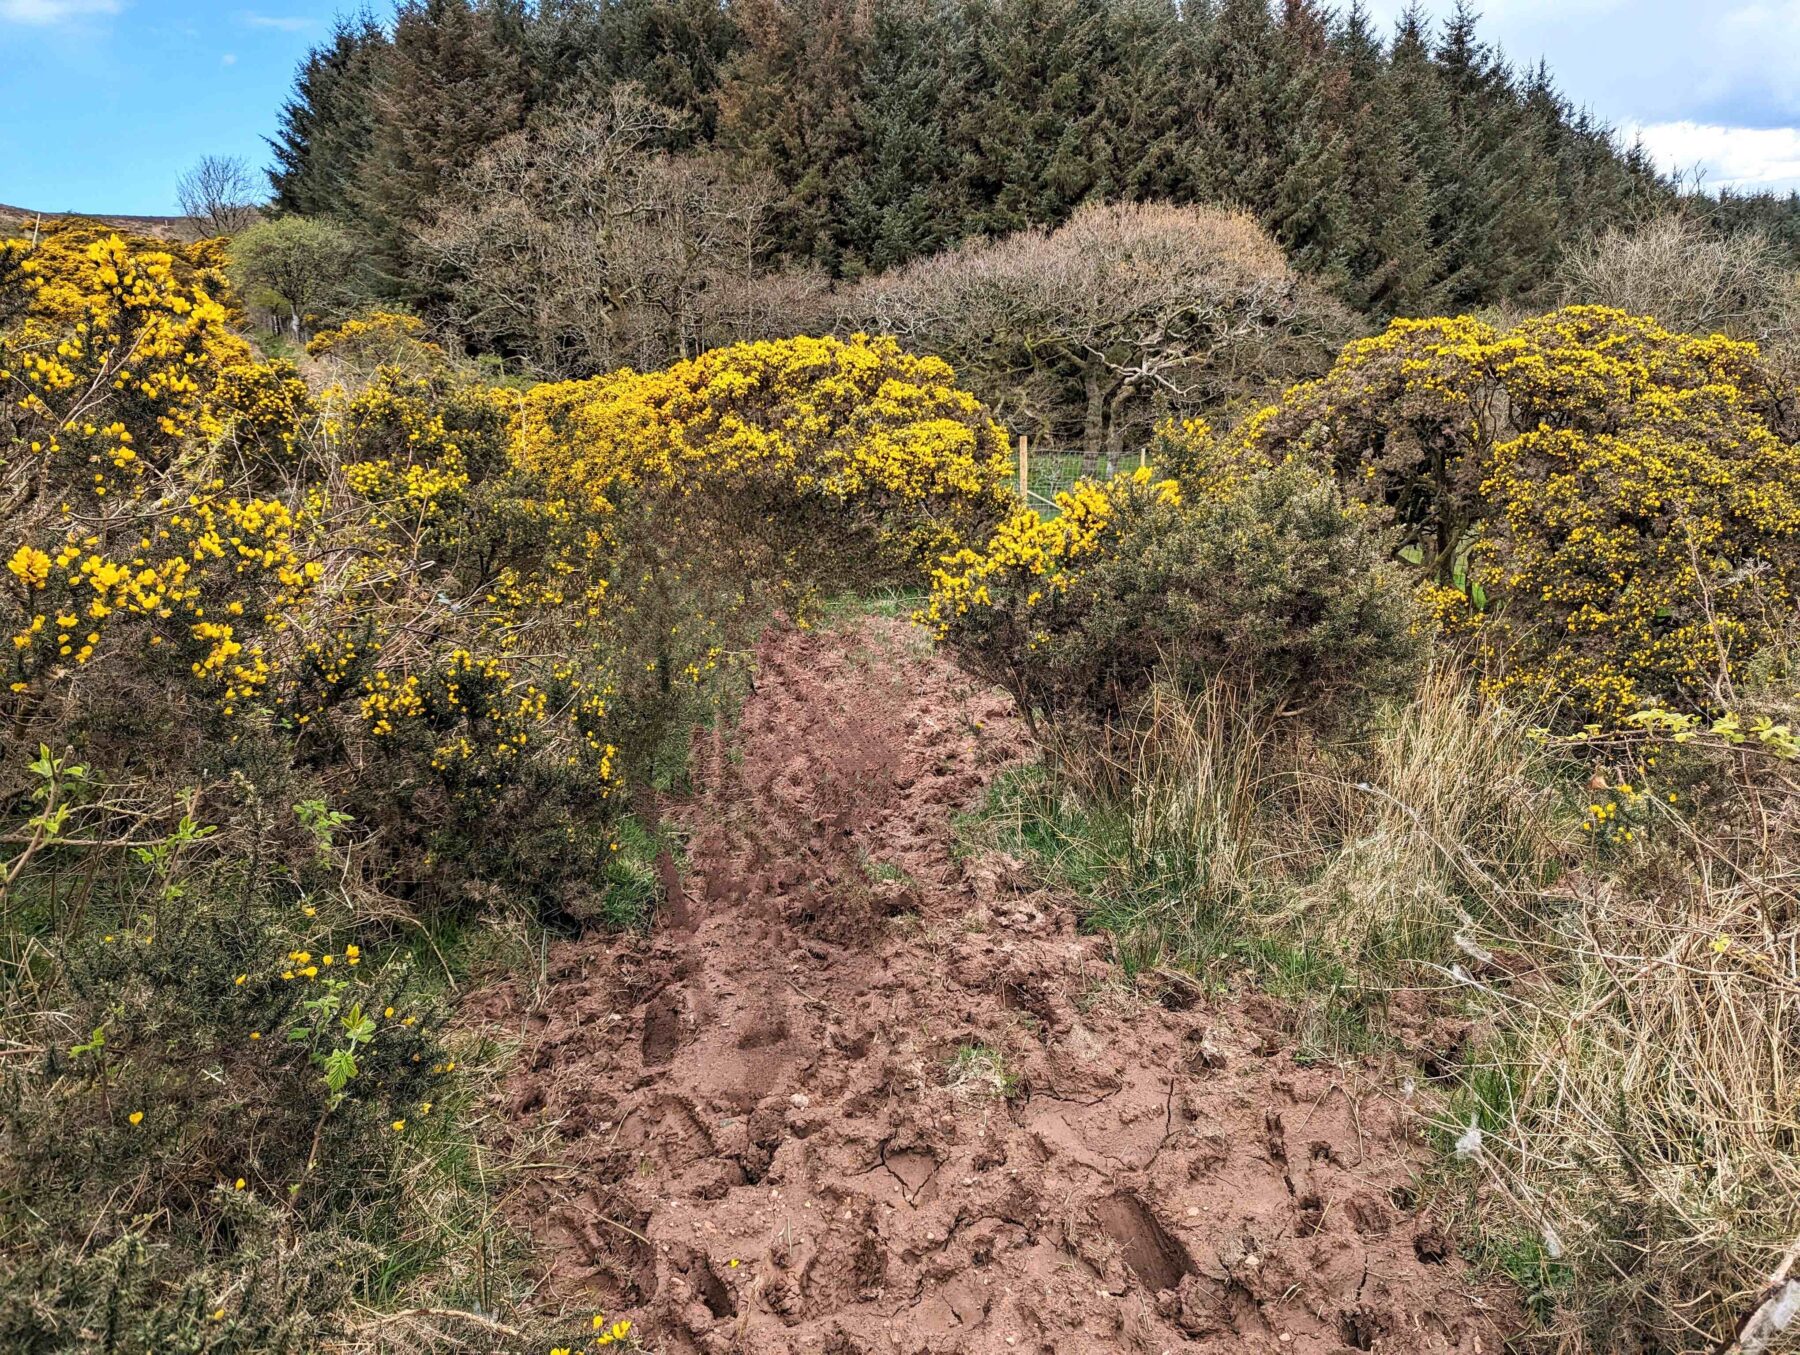 Muddy path surrounded by Gorse bushes